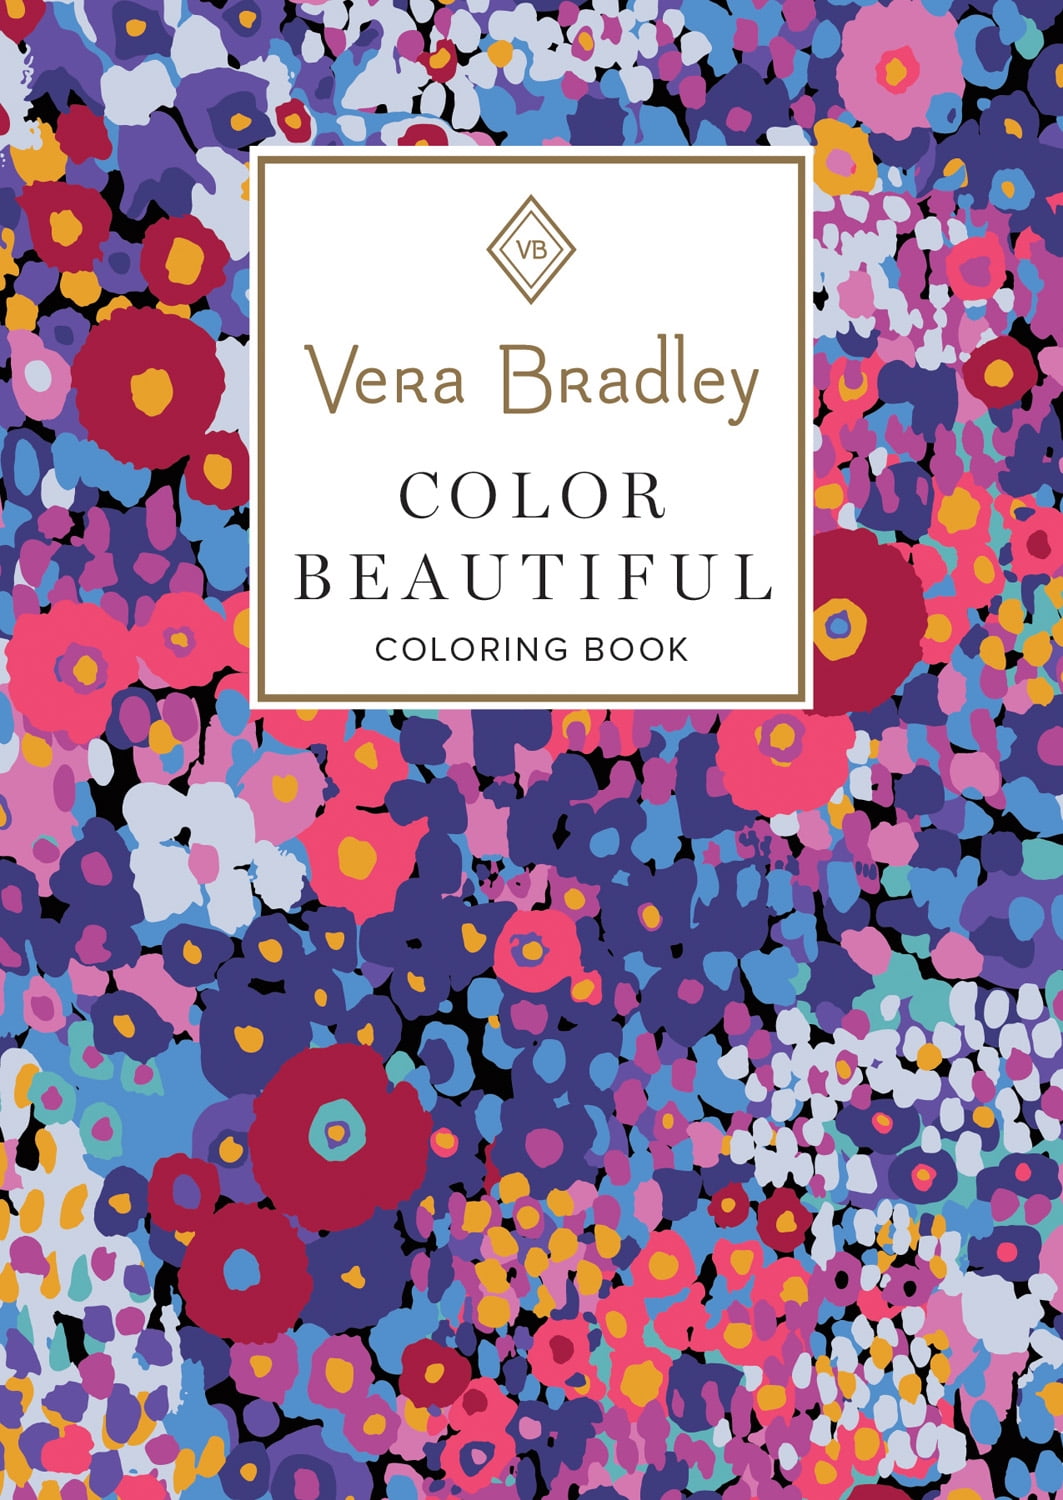 Review of Vera Bradley Adult Coloring Books